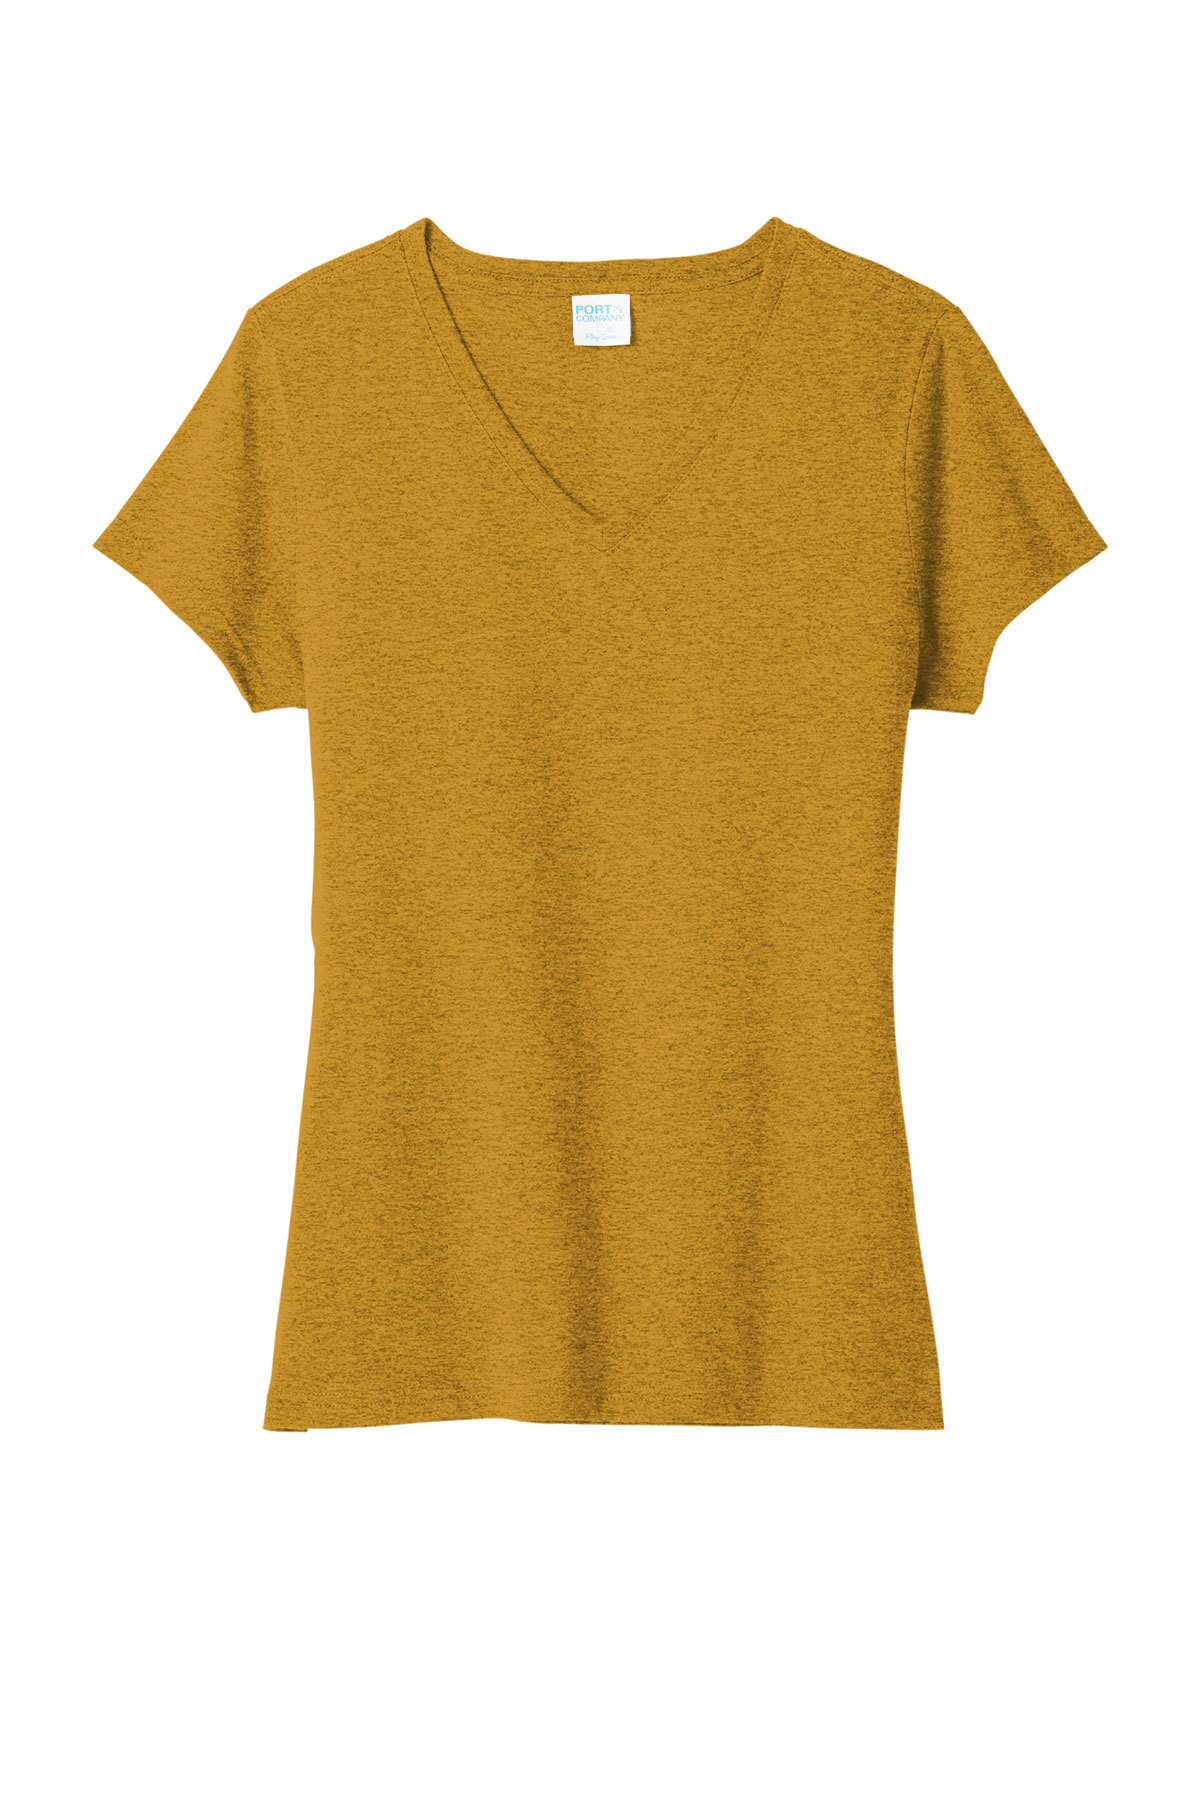 click to view Ochre Yellow Heather